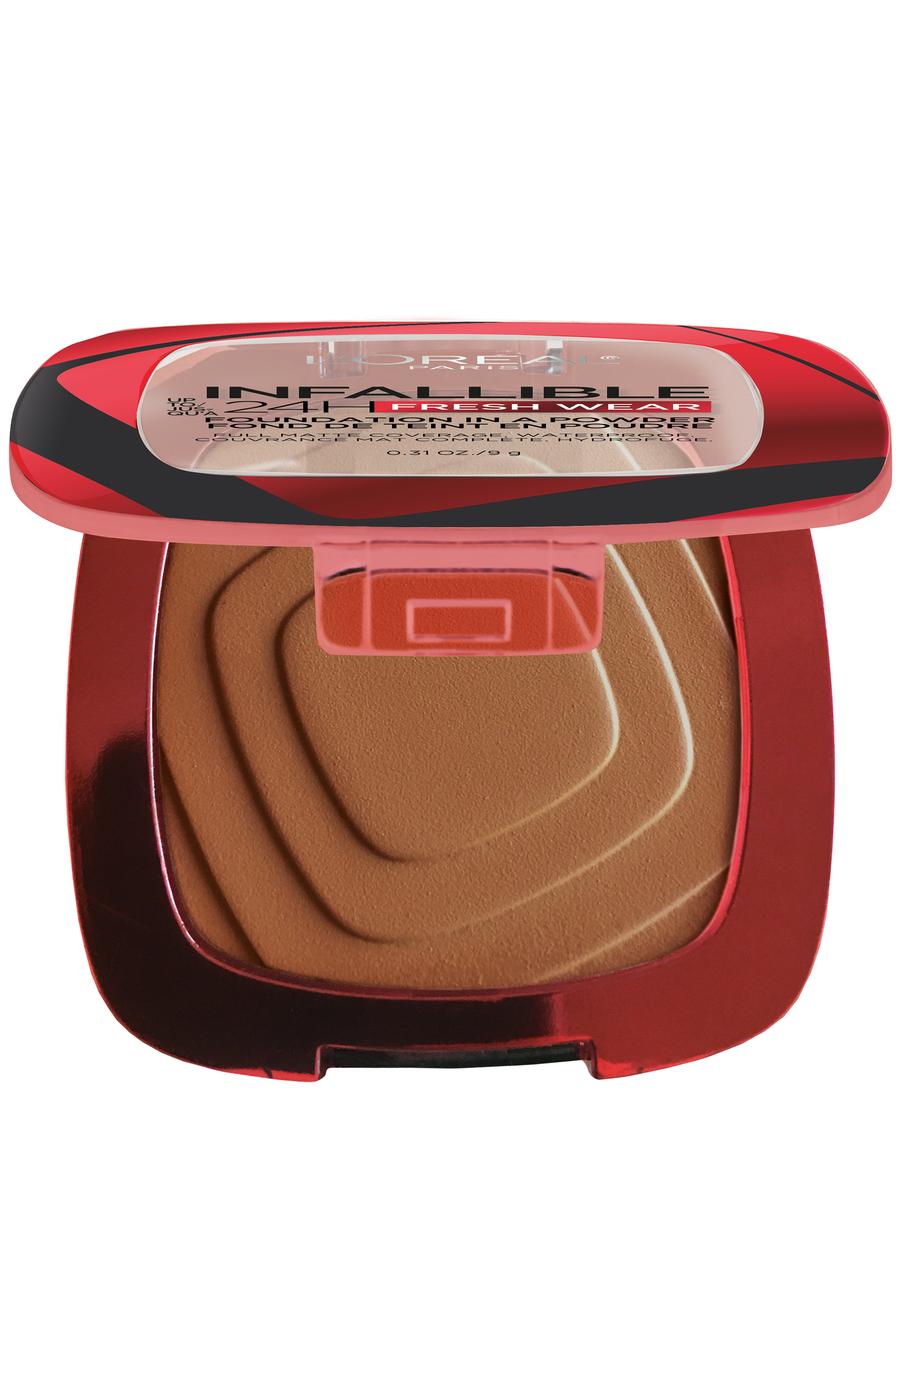 L'Oréal Paris Infallible Up to 24H Fresh Wear Foundation in a Powder Copper; image 2 of 4